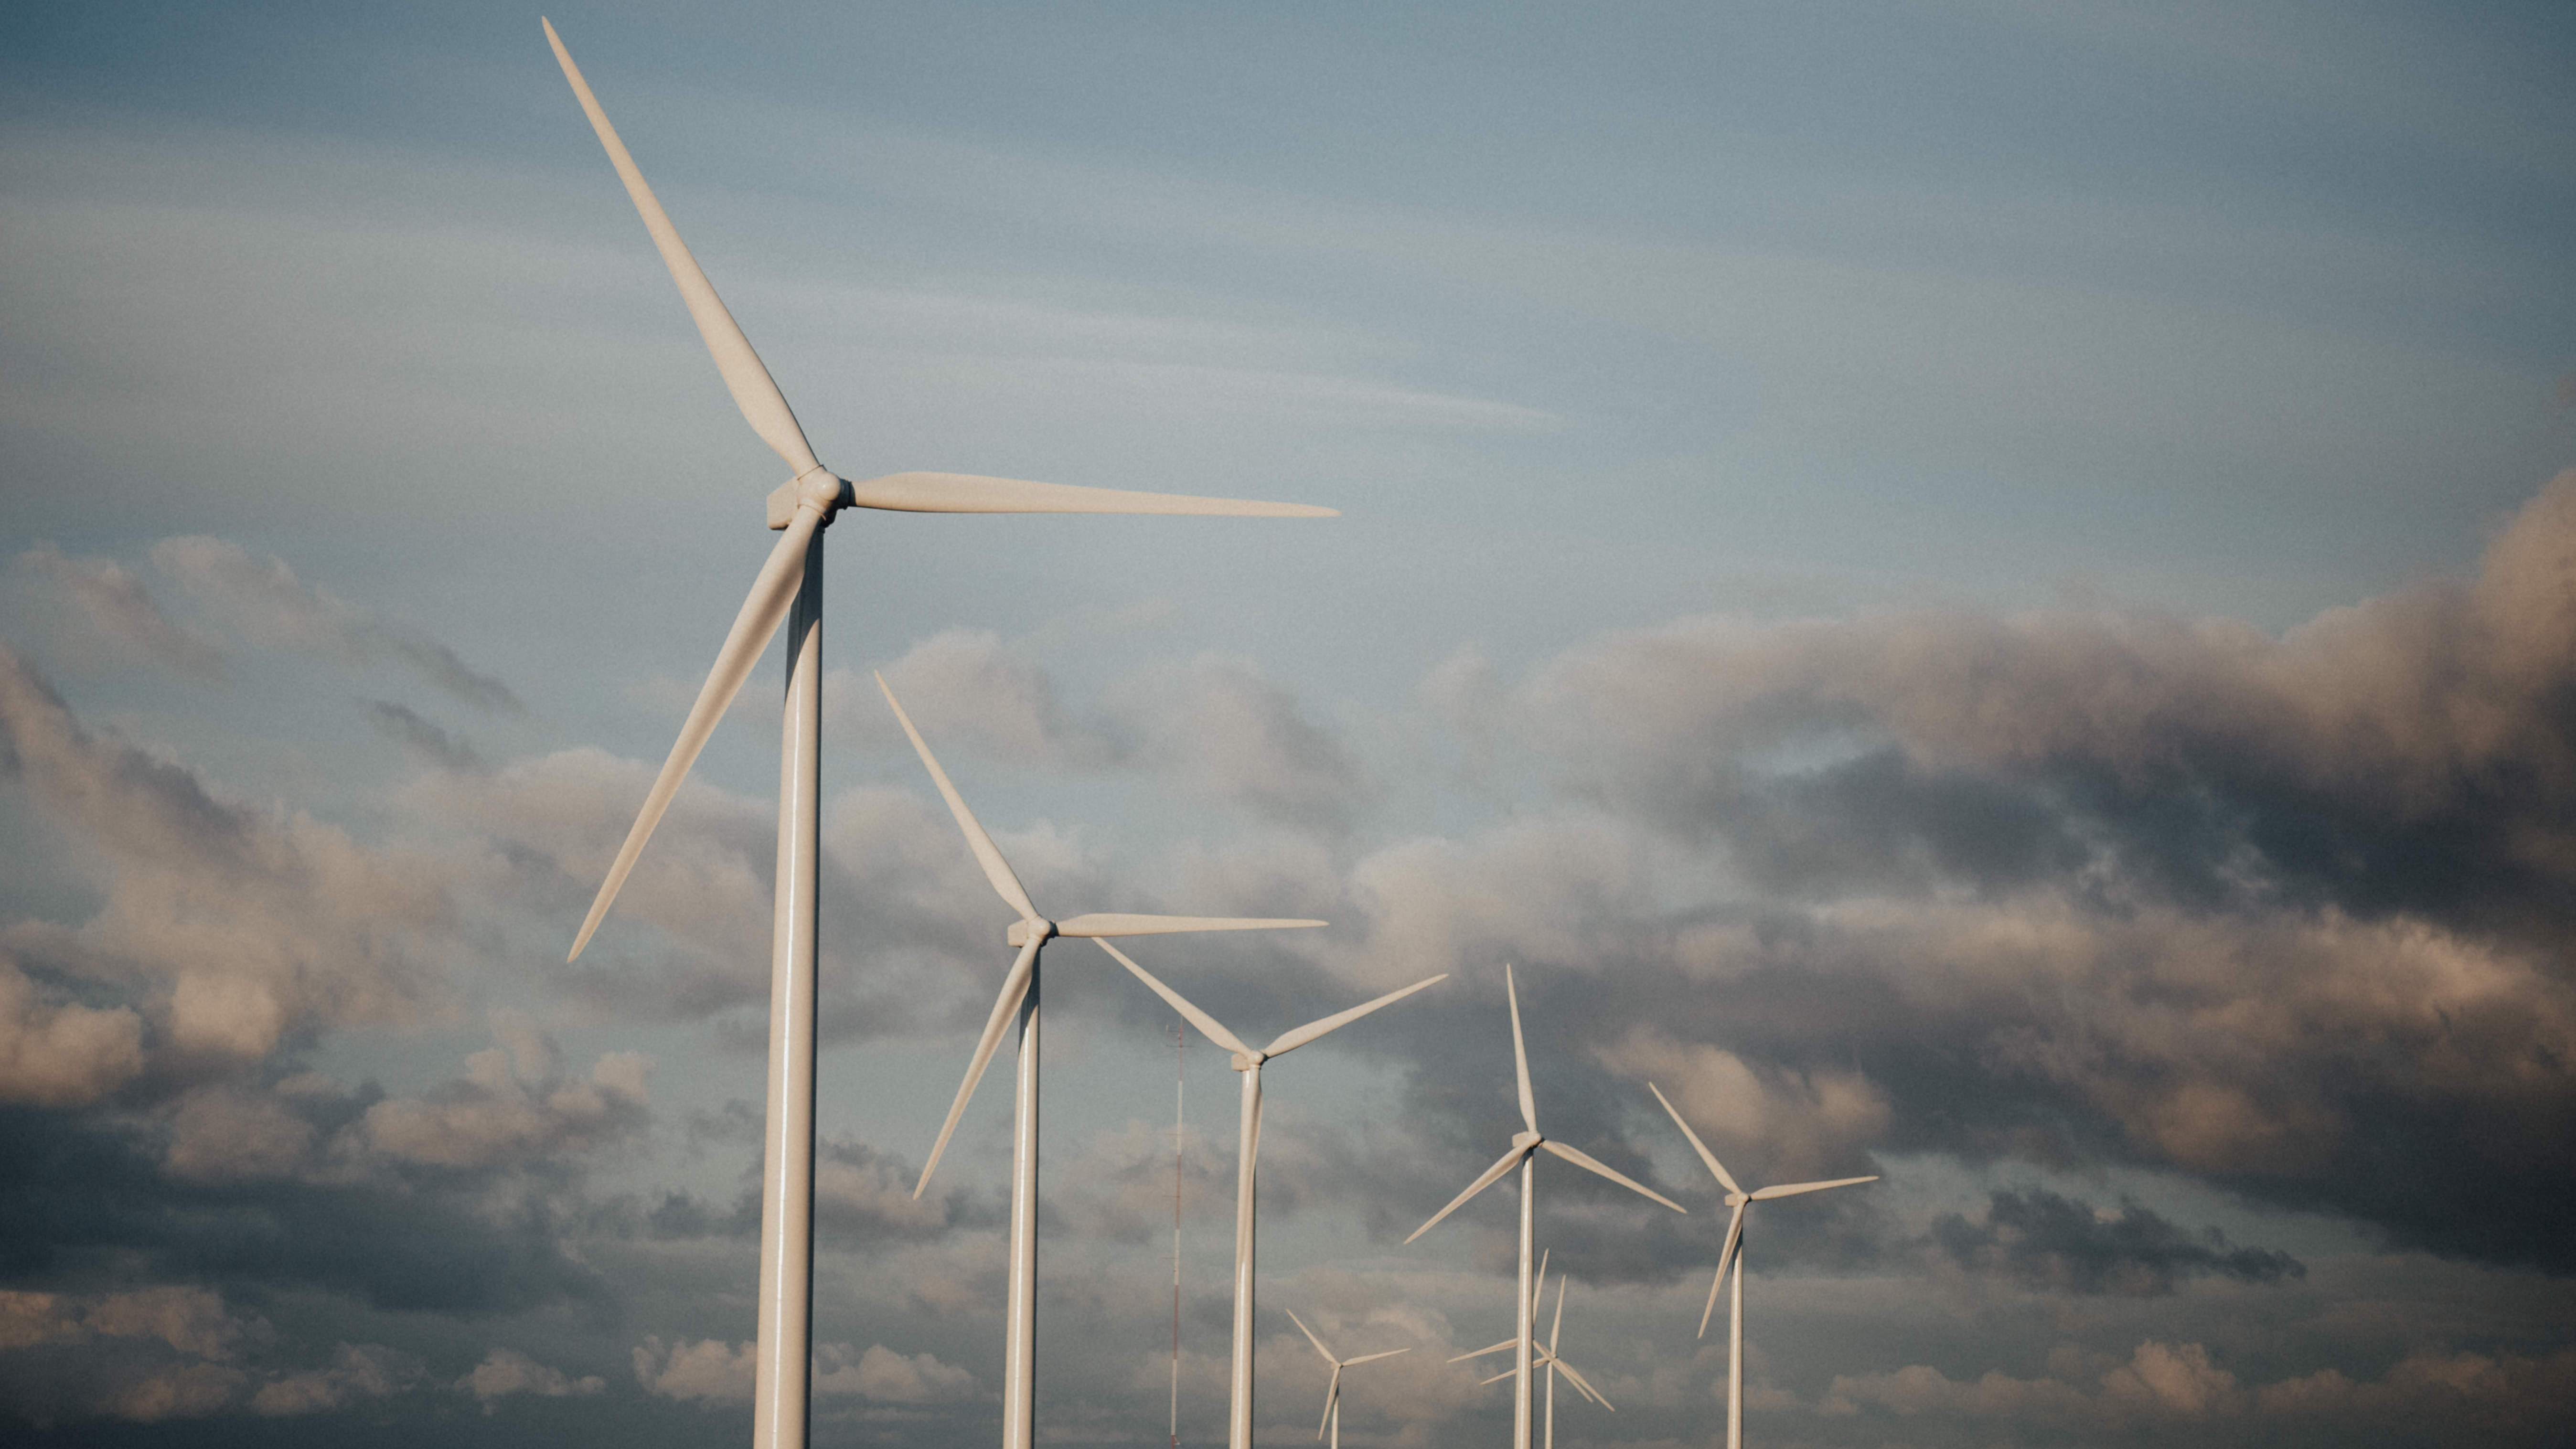 MidAmerican Energy plans to build 591MW wind project in Iowa, US